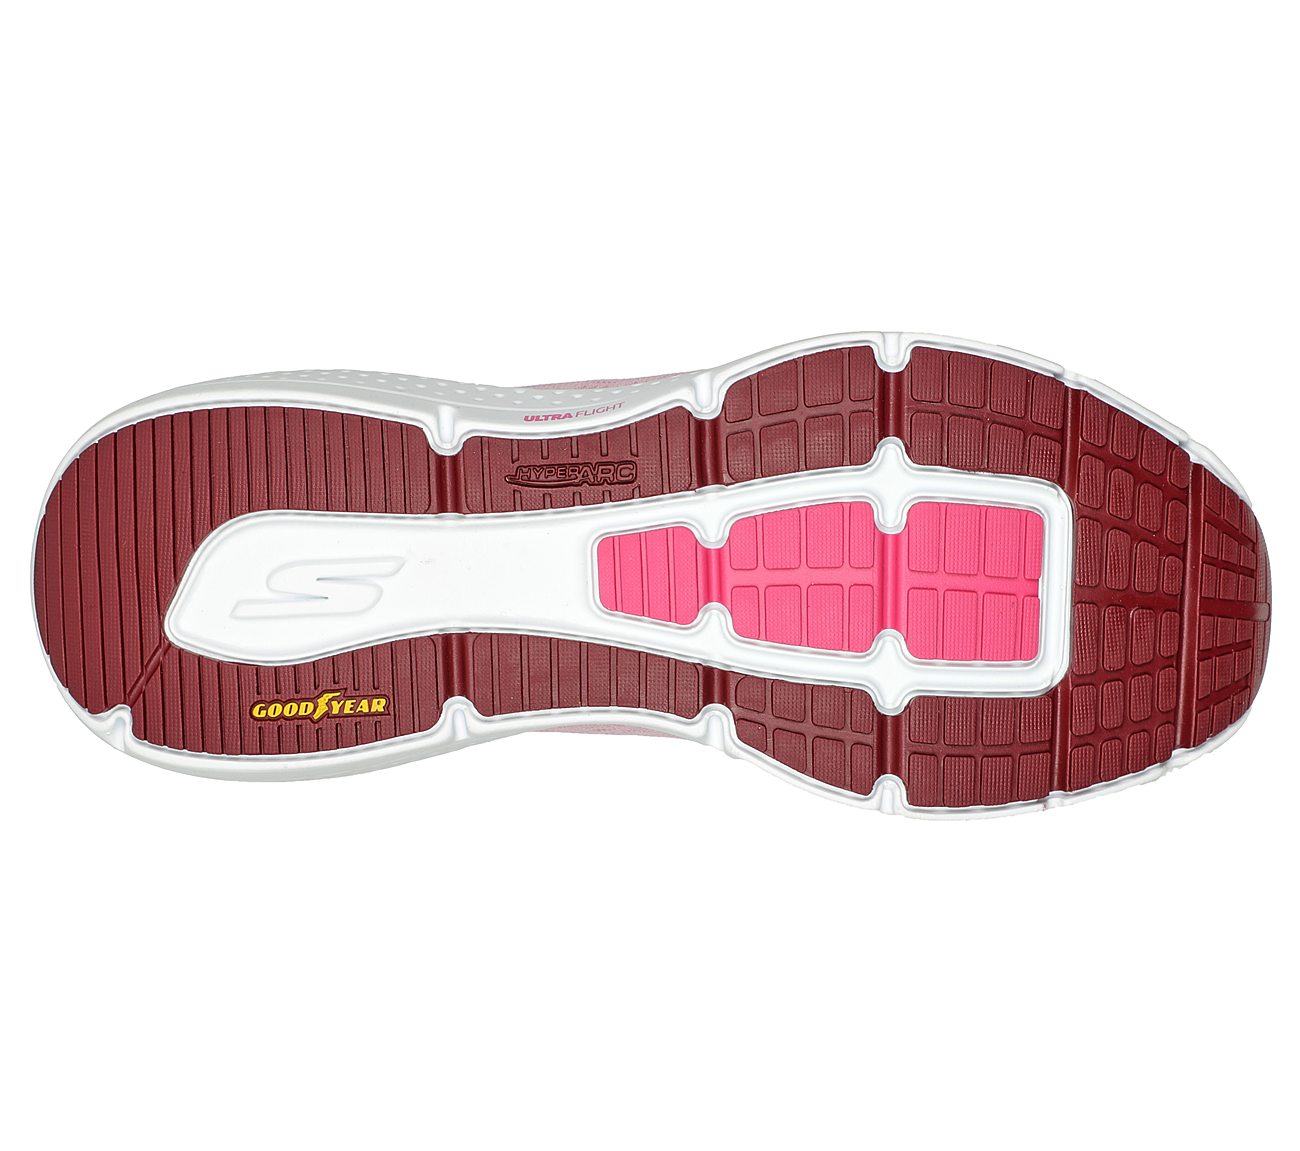 GO RUN PURE 3, PPINK Footwear Bottom View